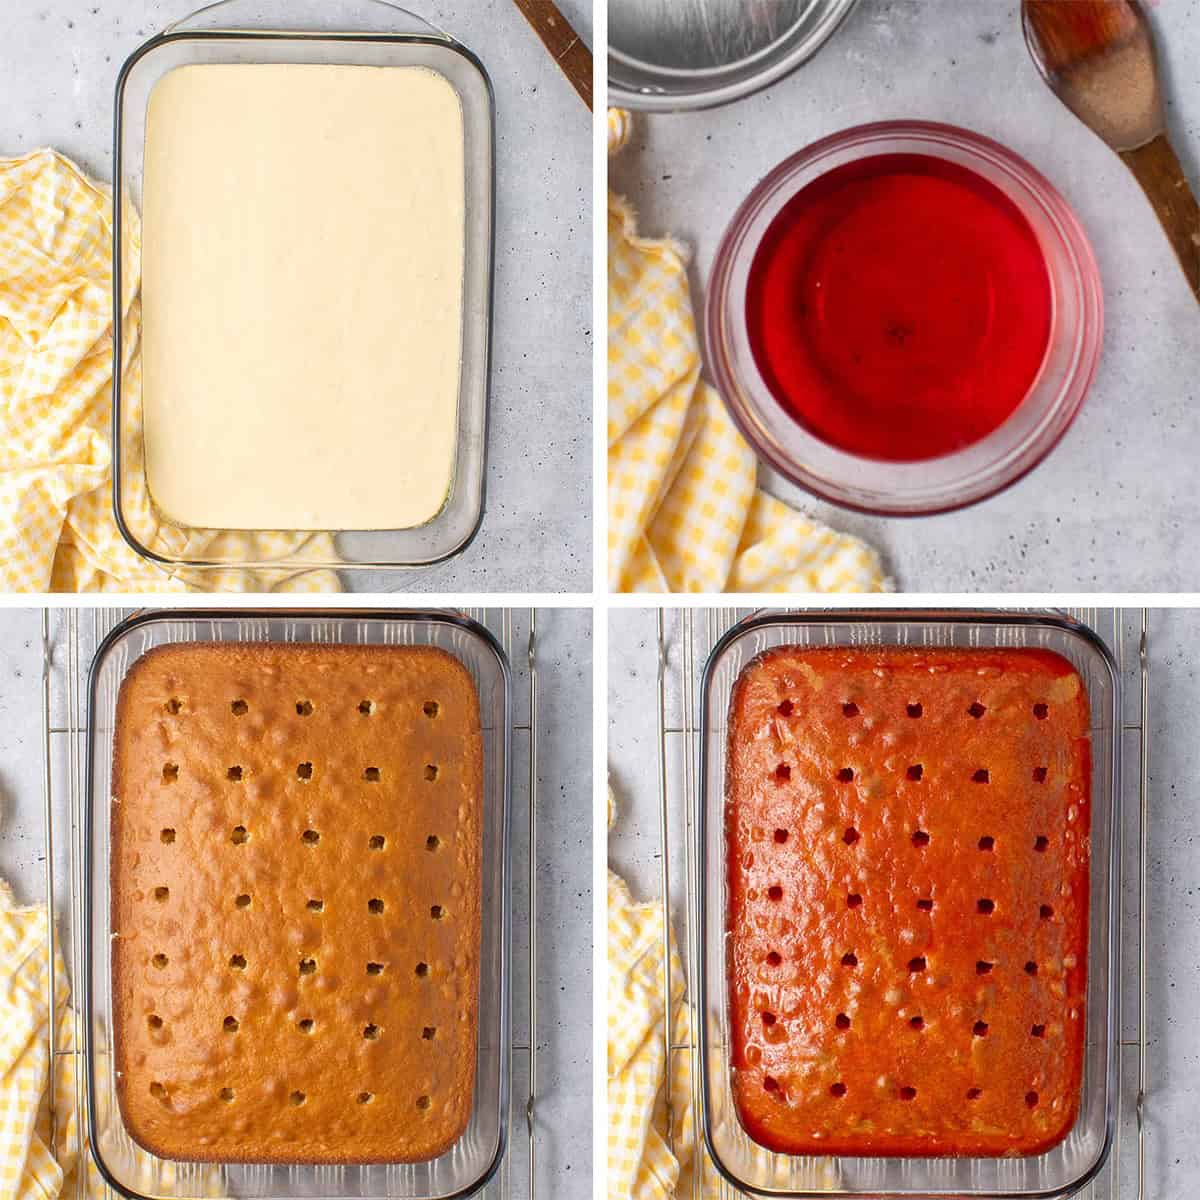 Four images of cake batter in a baking dish, liquid jello in a bowl, and a baked caked poked with holes.